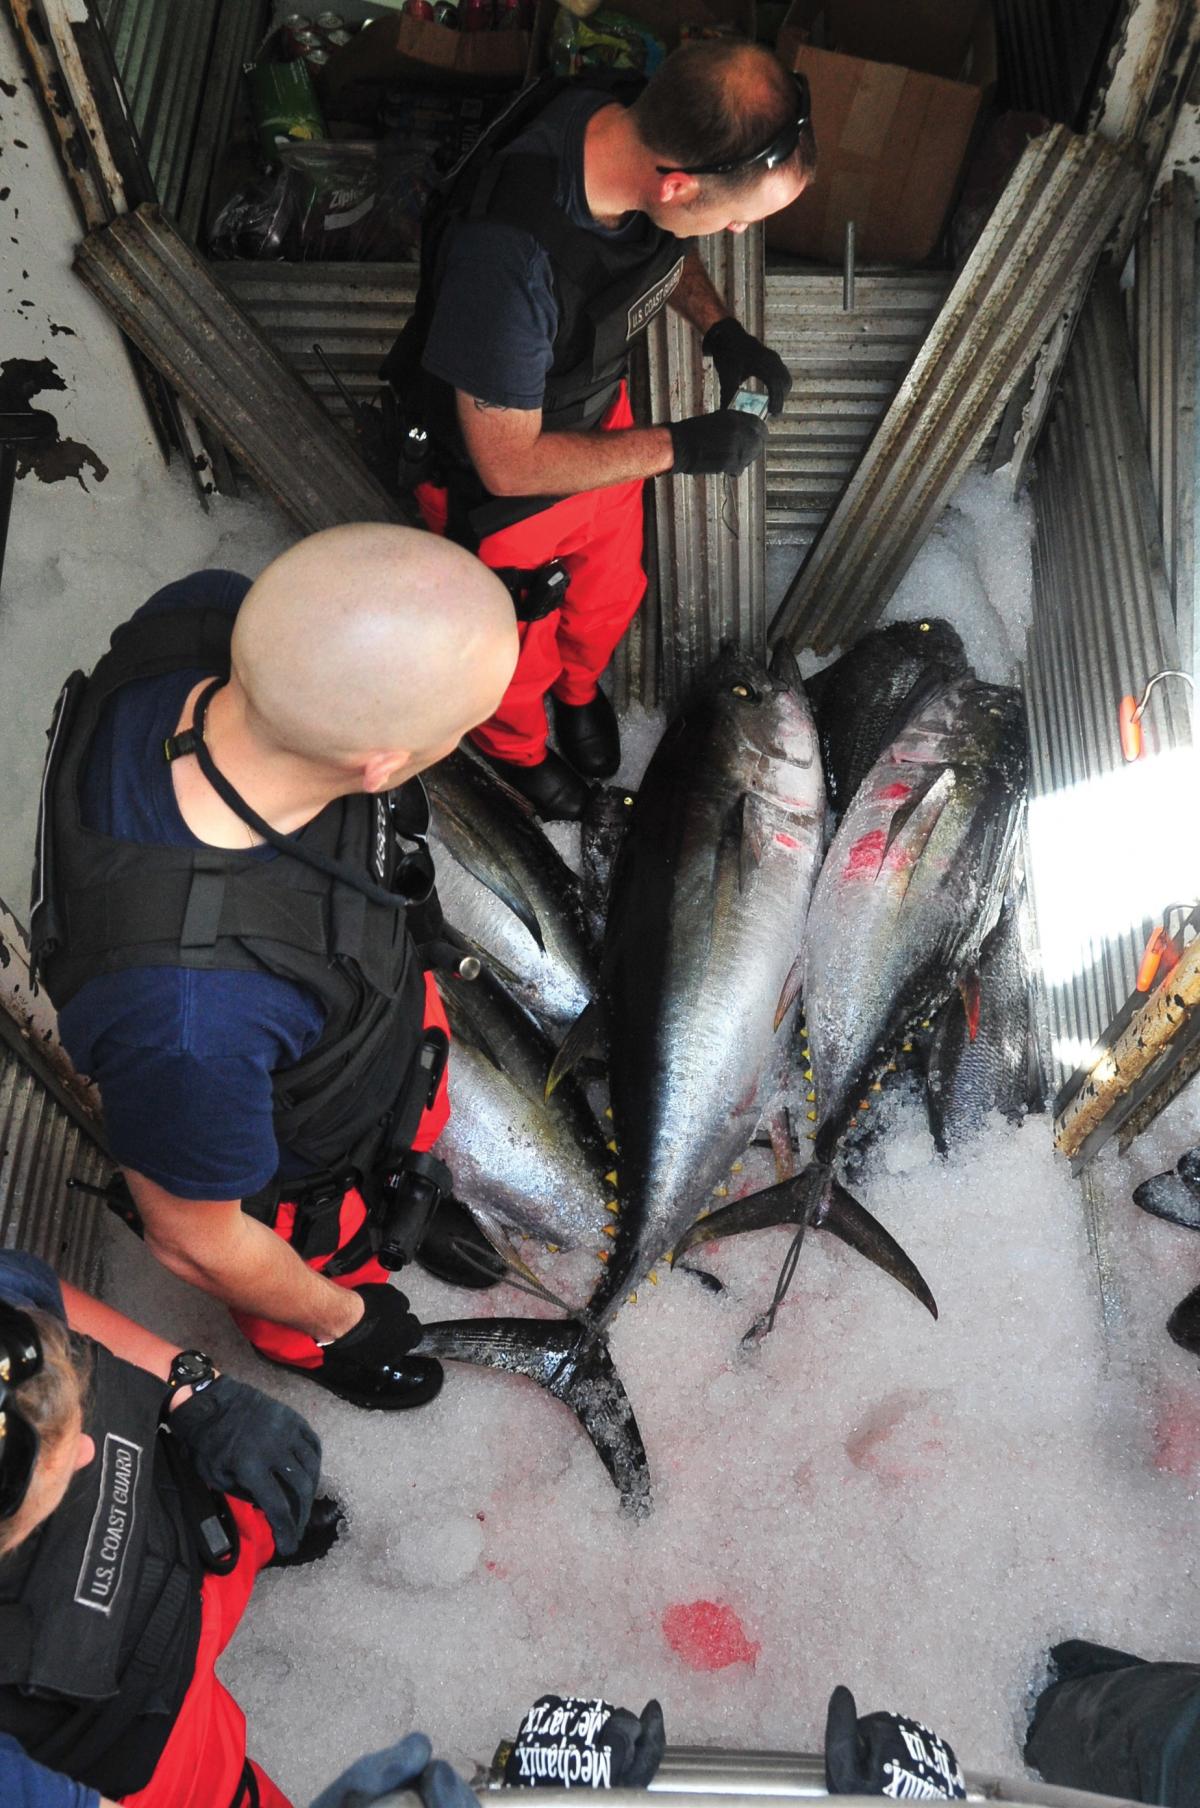 Boarding team members from Coast Guard Cutter Waesche inspect the refrigeration compartment of the fishing vessel Mariah